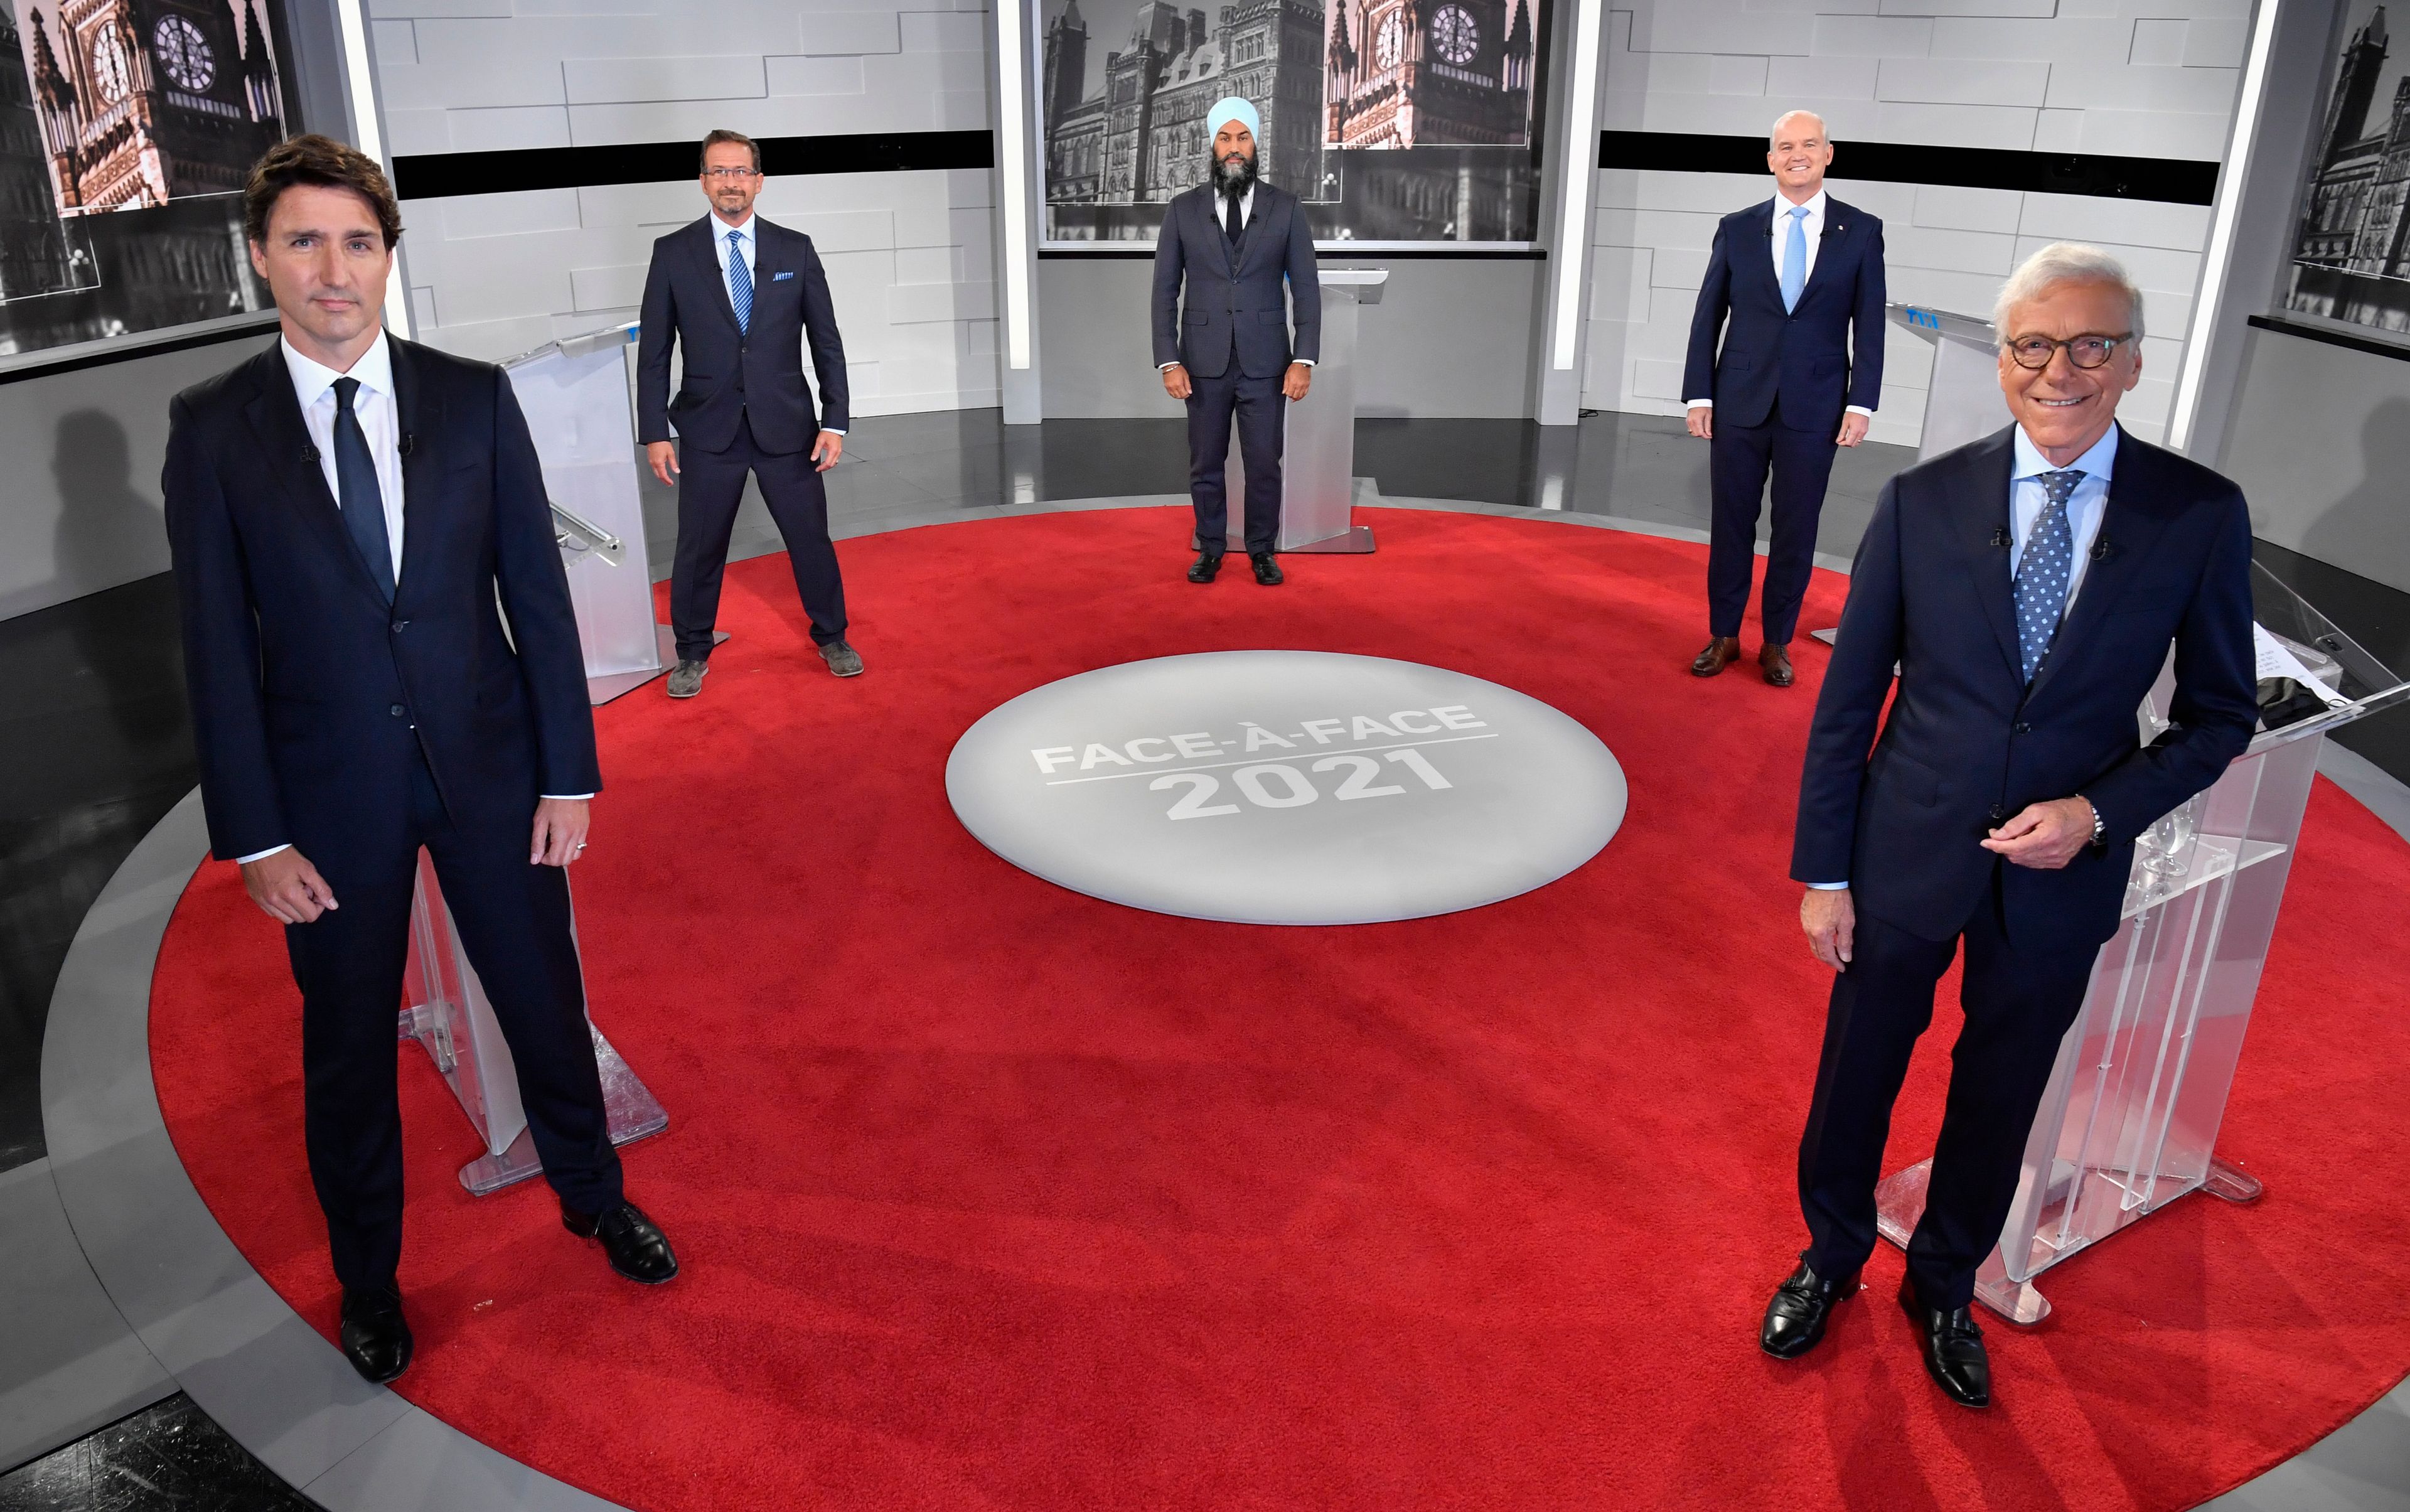 The official photo for the first French-language debate, left to right: Liberal Leader Justin Trudeau; Bloc Quebecois Leader Yves-Francois Blanchet; NDP Leader Jagmeet Singh; Conservative Leader Erin O'Toole; and debate moderator Pierre Bruneau. (Martin Chevalier/CP-pool)